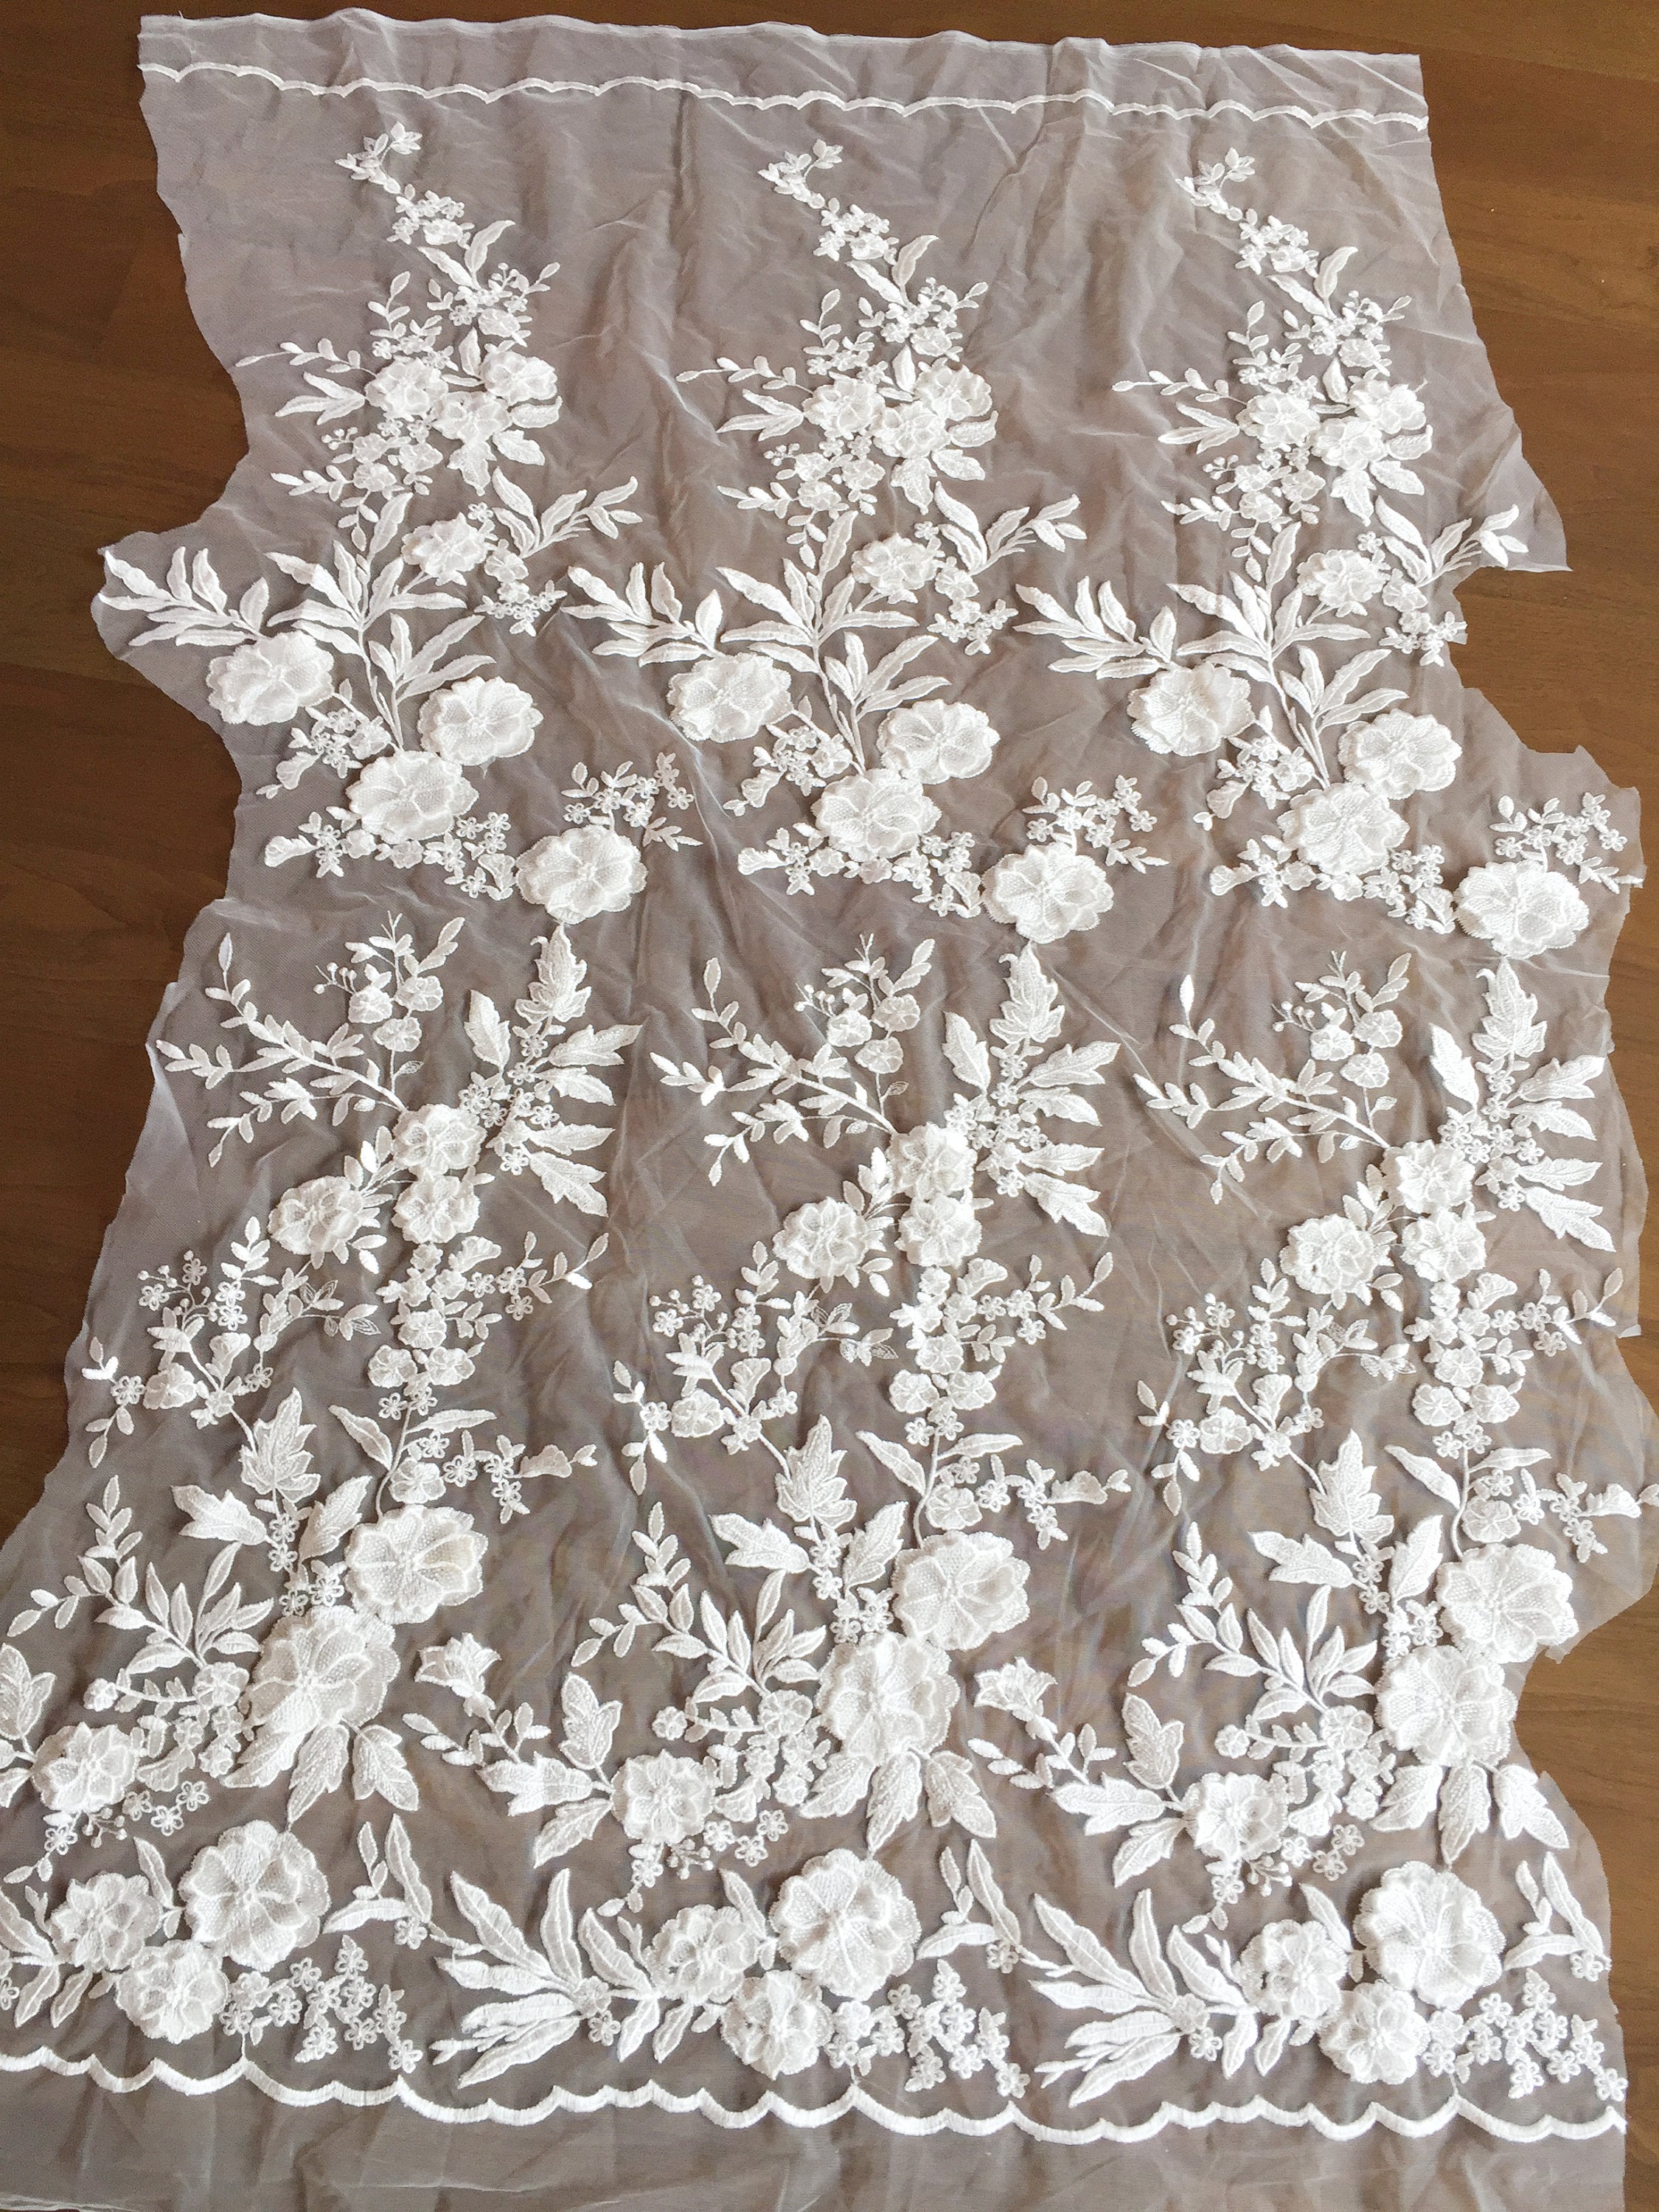 Luxurious Embroidered White Bridal Lace Applique with Dimensional Flowers -  Mariell Bridal Jewelry & Wedding Accessories